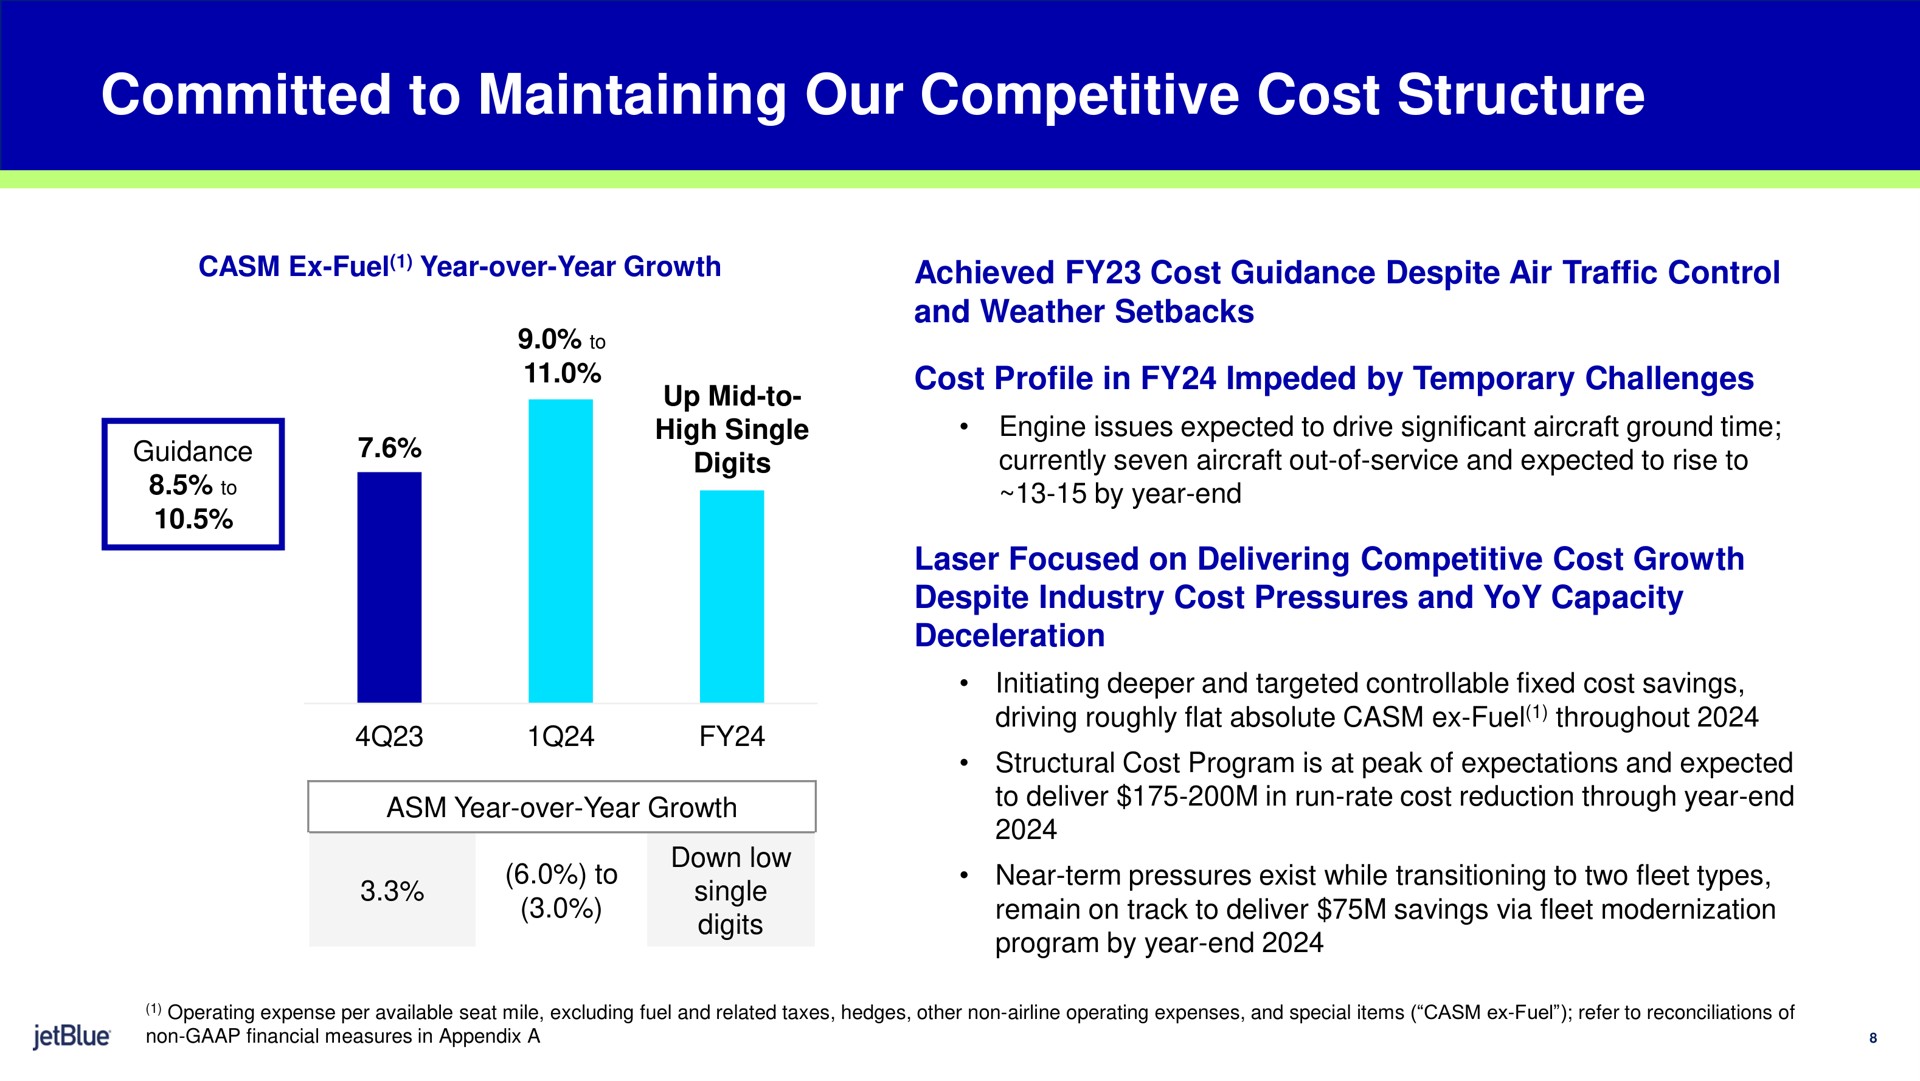 committed to maintaining our competitive cost structure achieved cost guidance despite air traffic control and weather setbacks cost profile in impeded by temporary challenges laser focused on delivering competitive cost growth despite industry cost pressures and yoy capacity deceleration fuel year over year year end | jetBlue